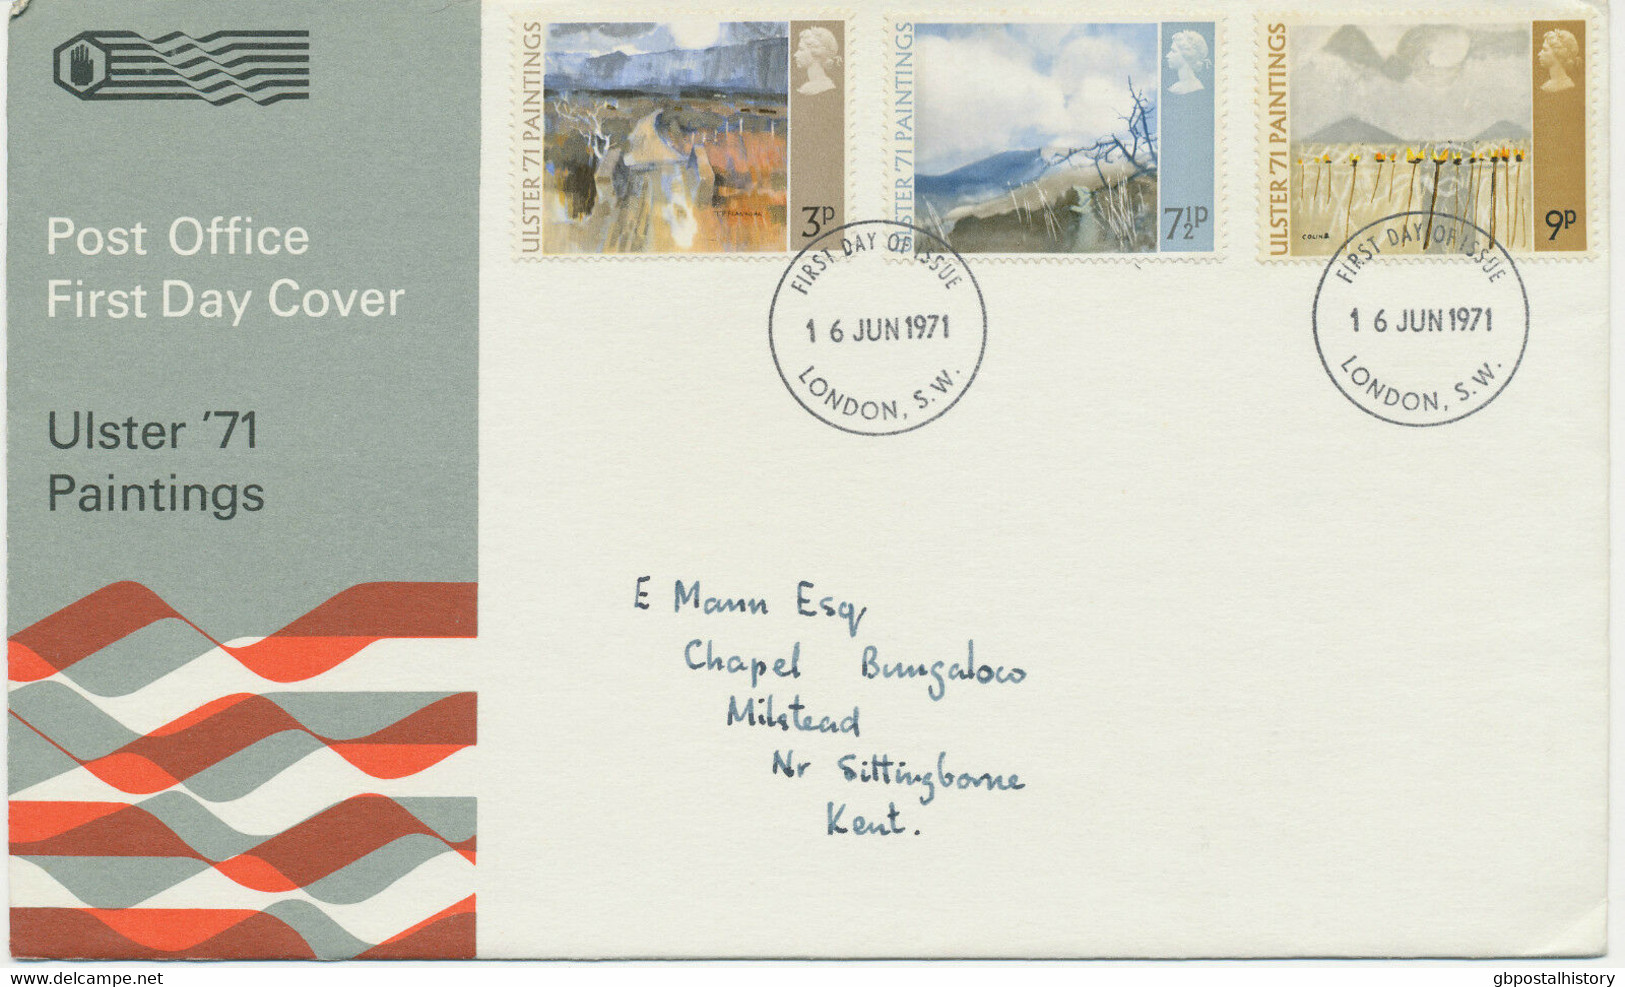 GB 1971, Ulster Paintings On Very Fine FDC With FDI-CDS "LONDON, S.W." - 1971-1980 Decimal Issues